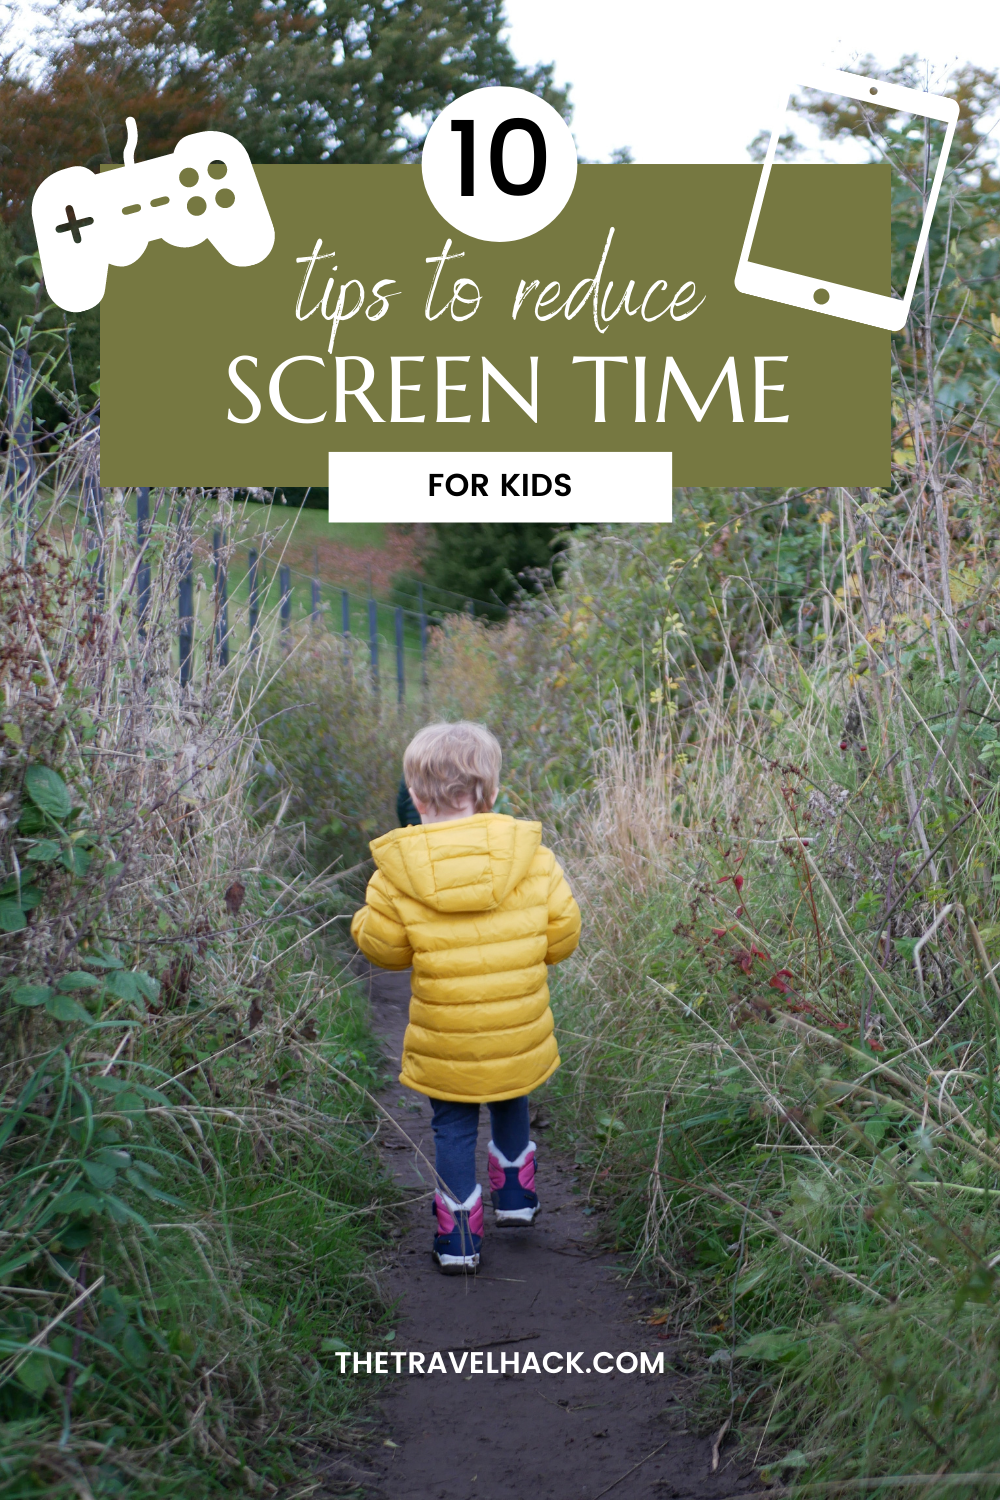 10 Ideas to Help Reduce Screen Time for Your Kids